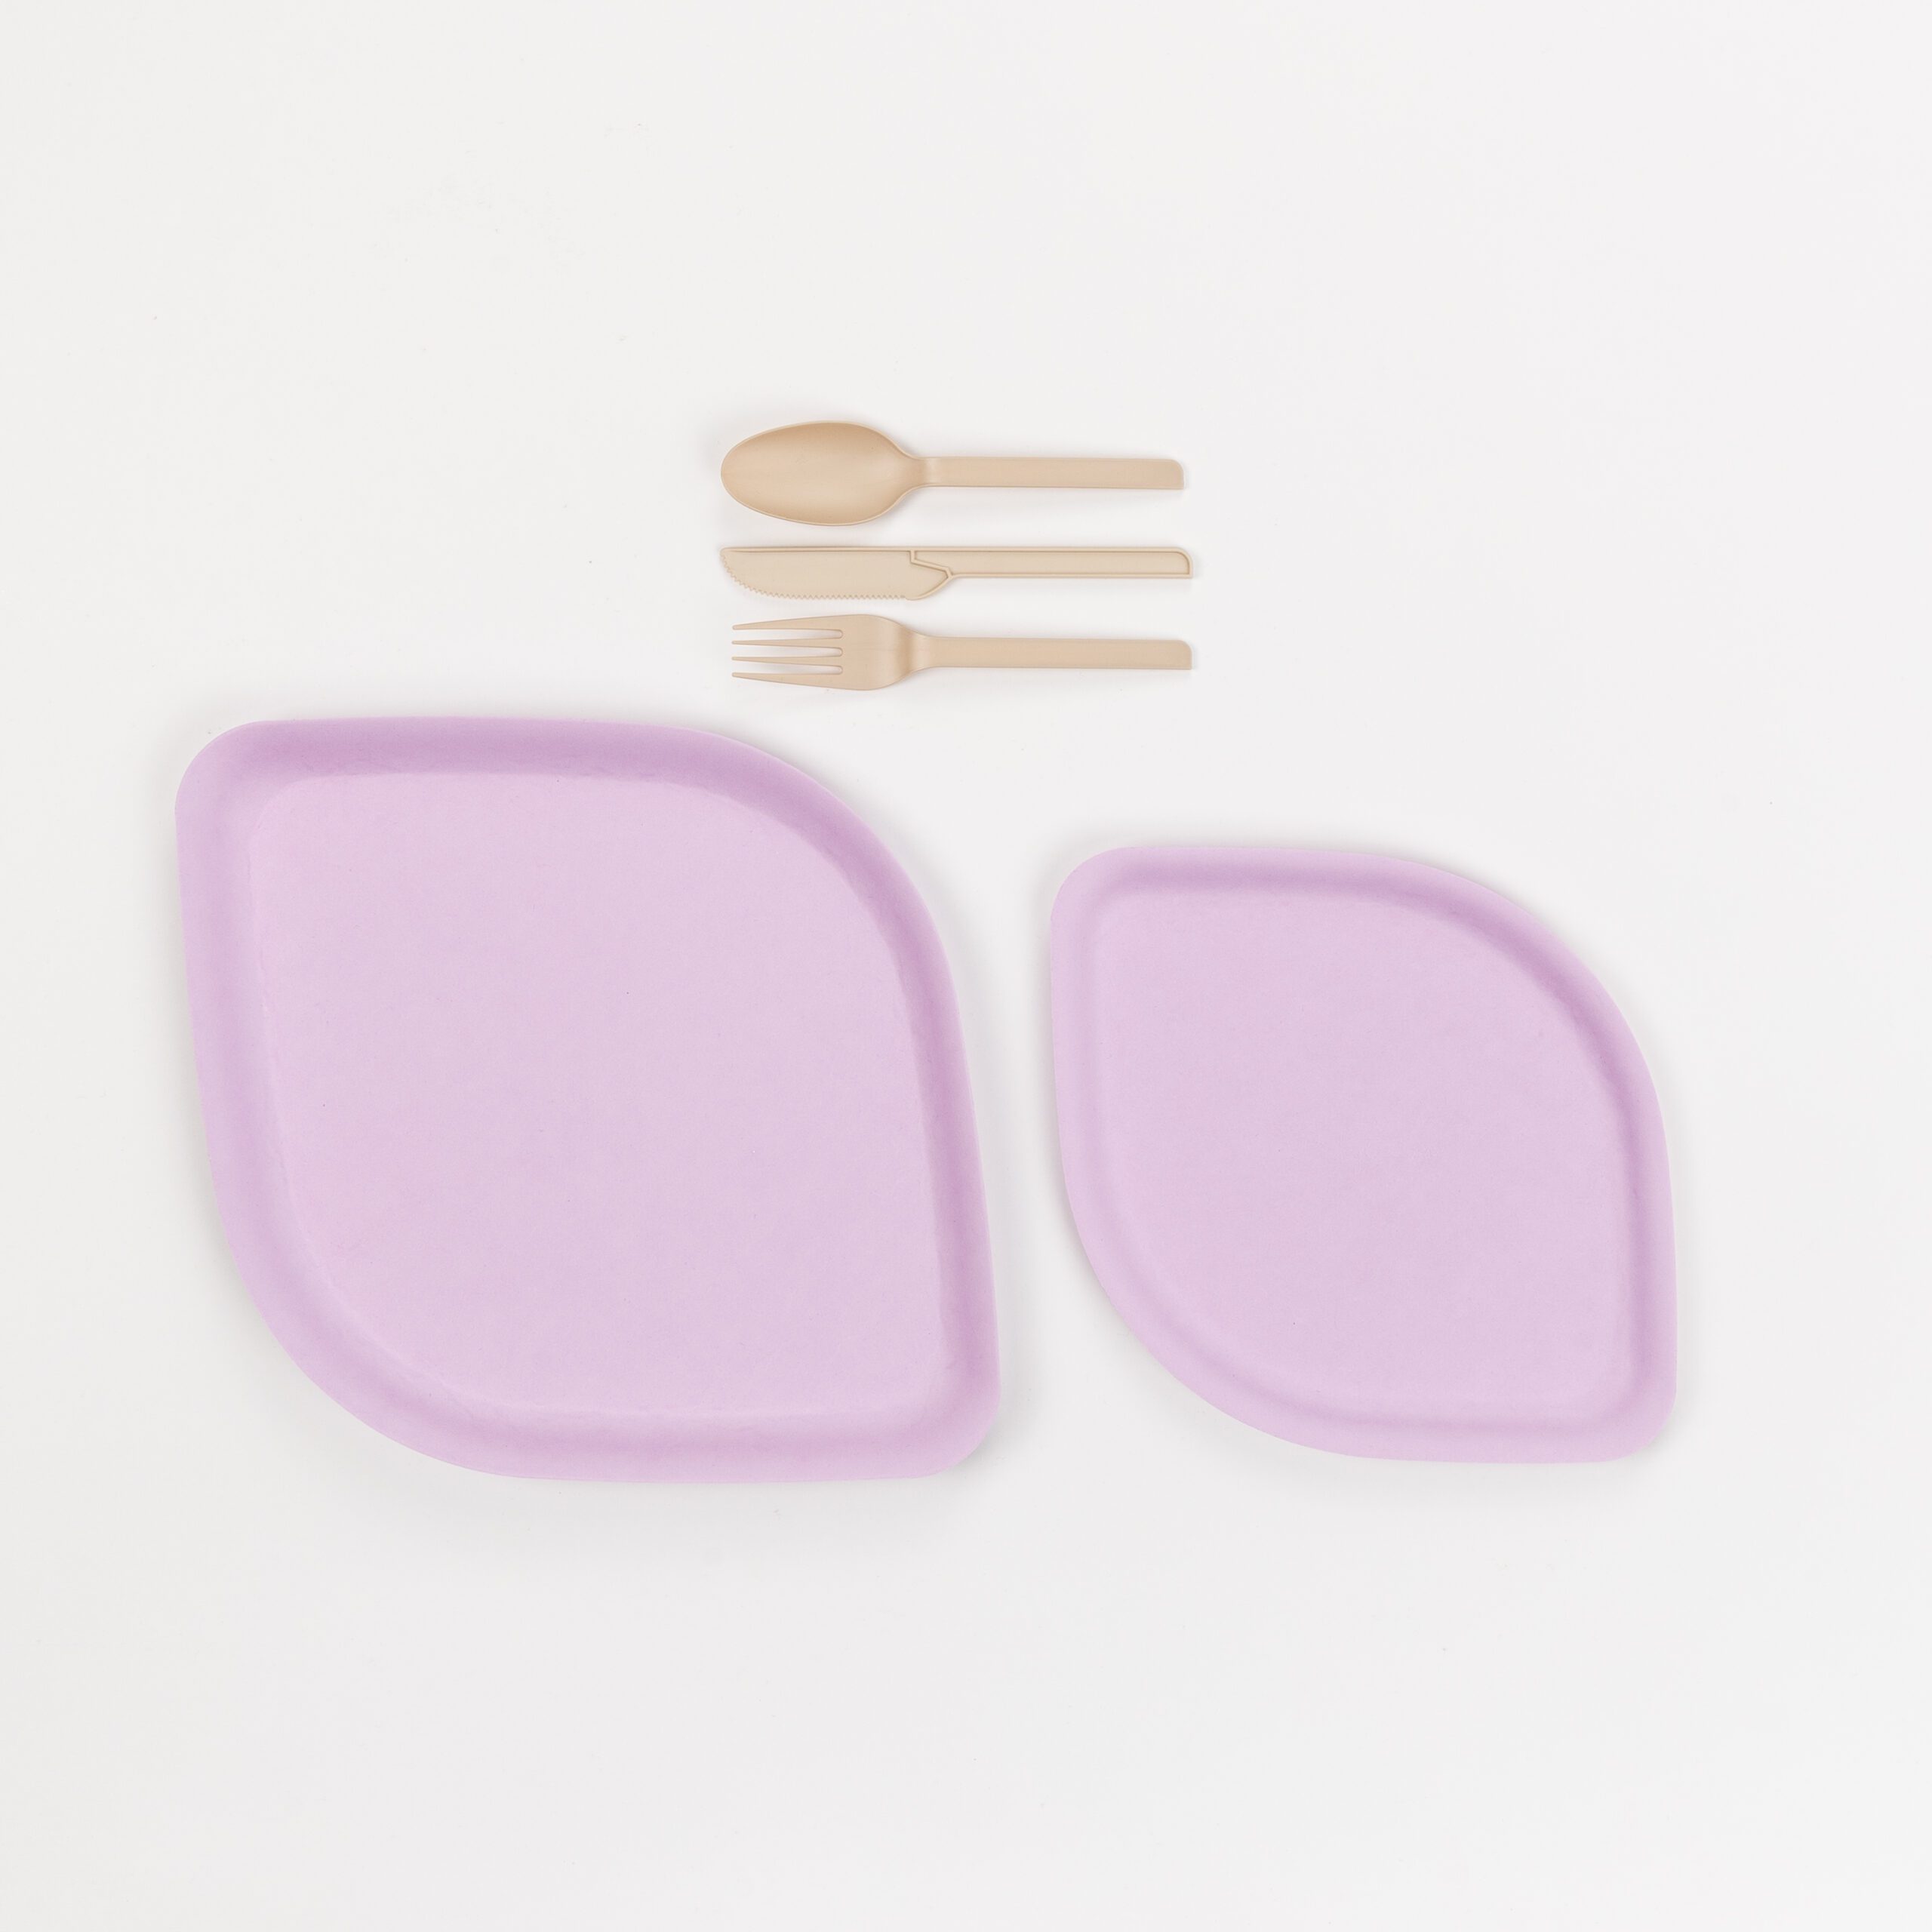 Pickytarian Dinner Plates (Purple) and Cutlery on a White-ish background.